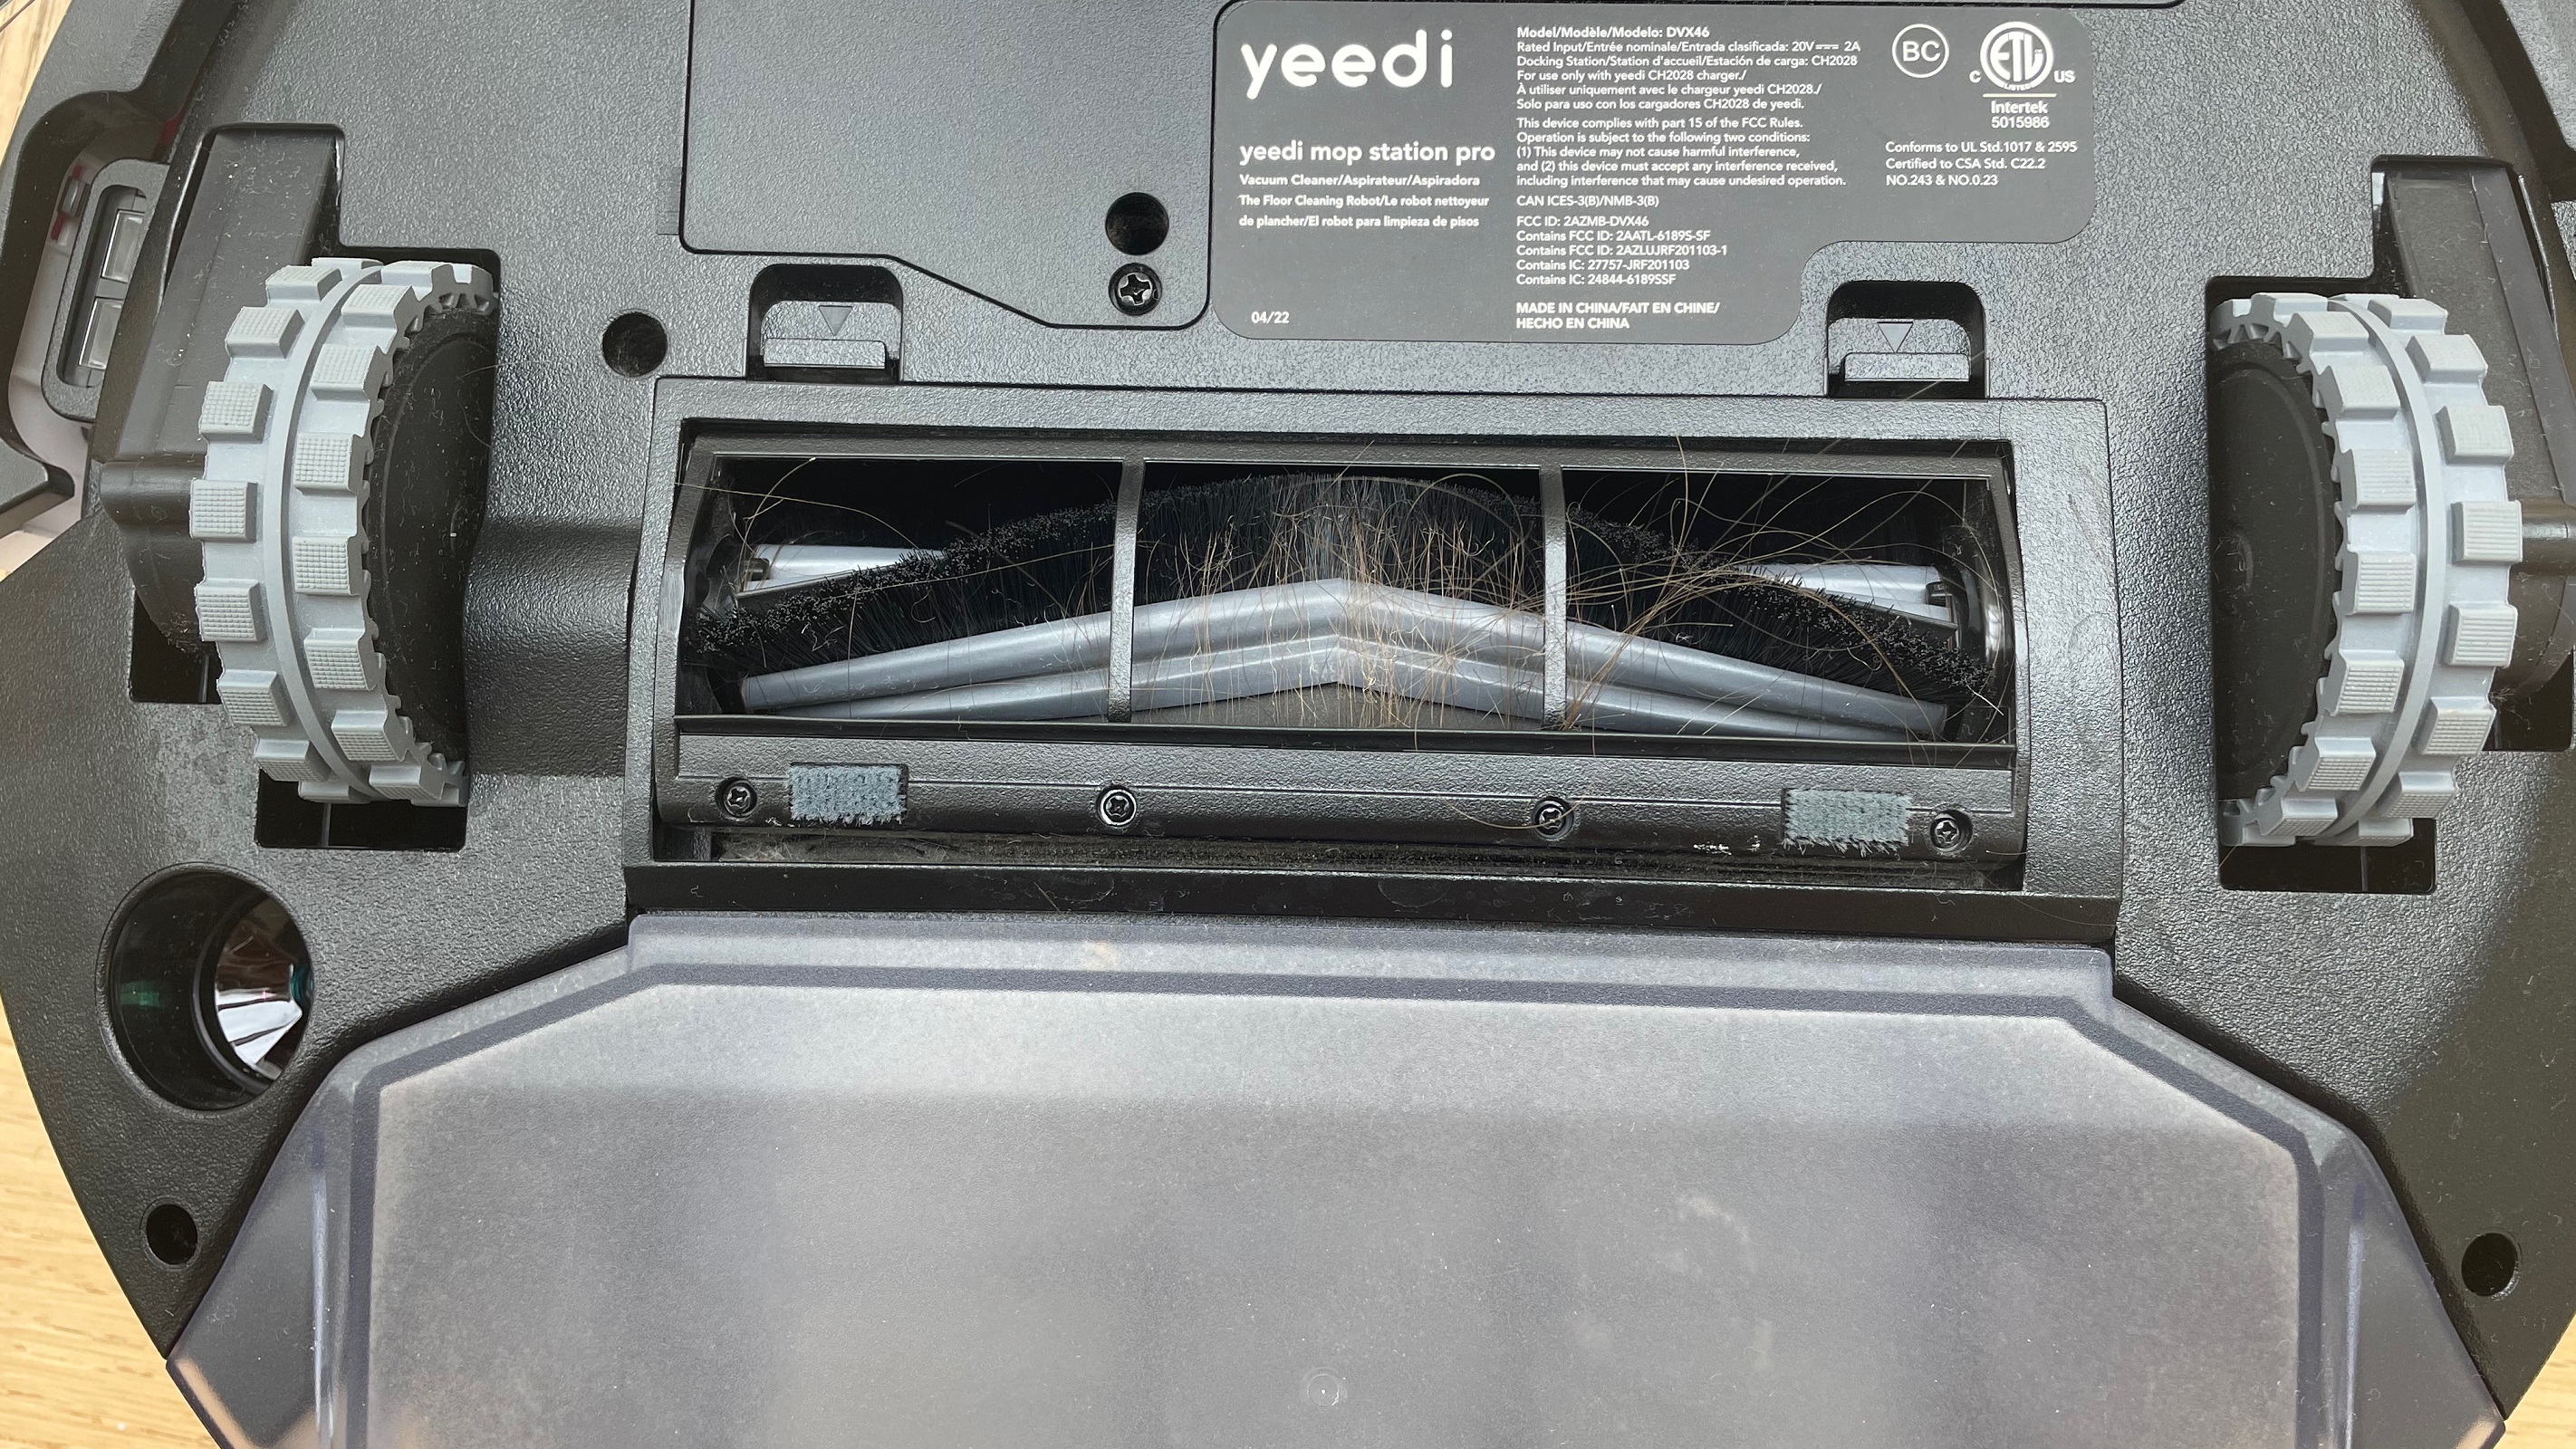 Tangled hair in the roller in vacuum mode using the Yedi Mop Station Pro